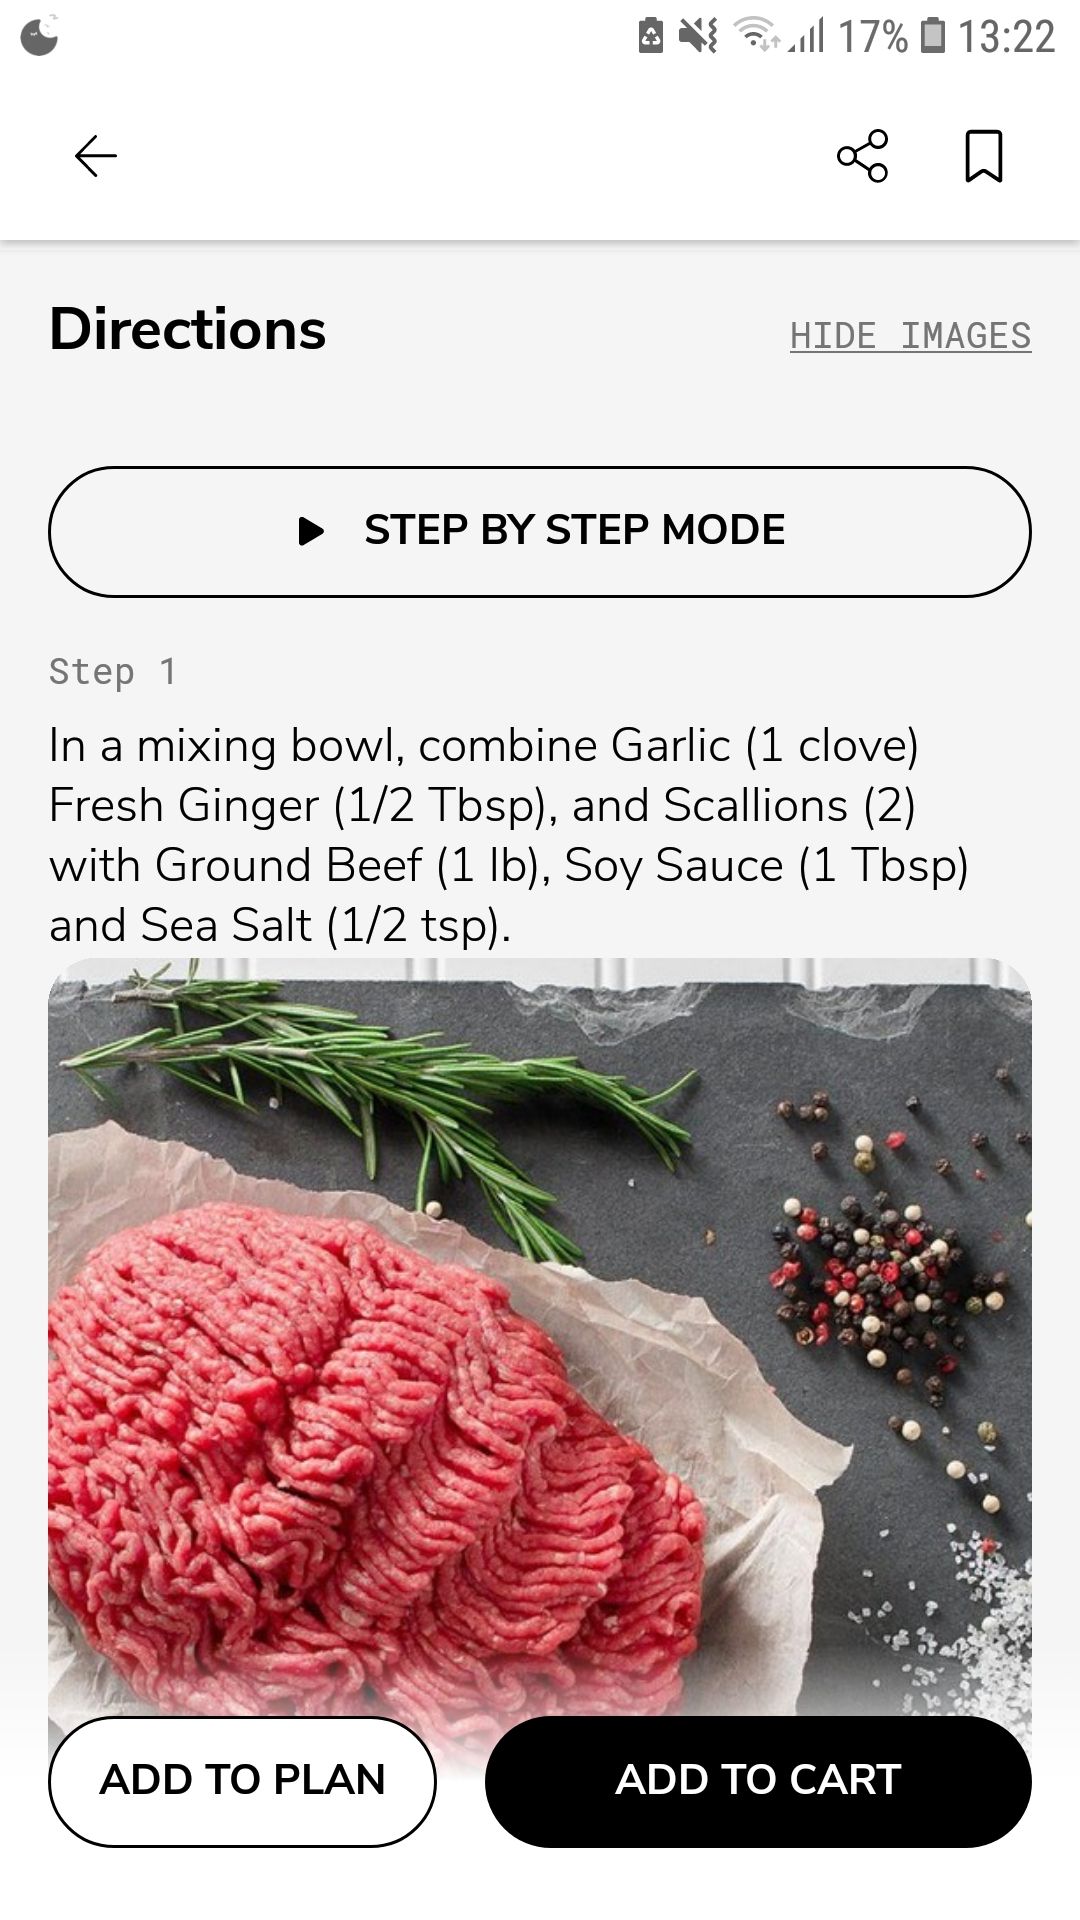 SideChef mobile recipe and meal planning app directions